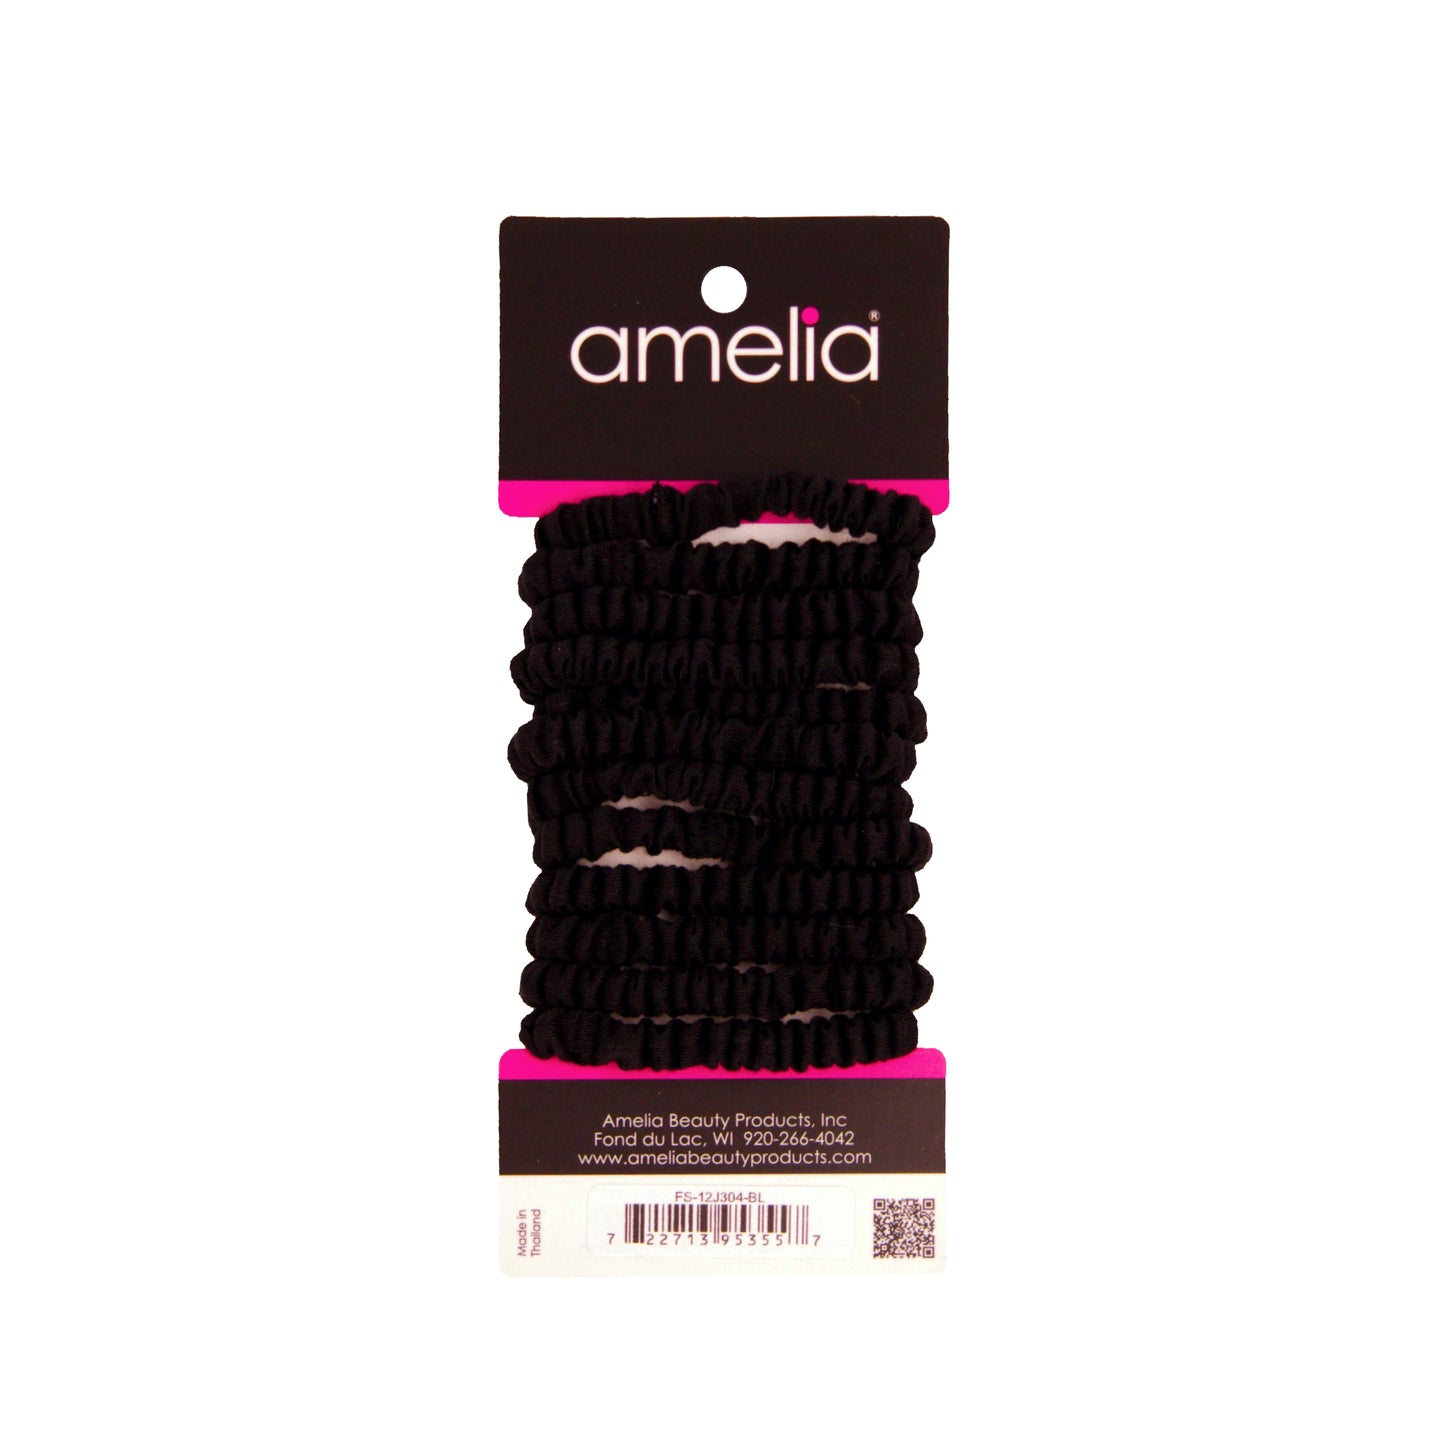 Amelia Beauty, Black Skinny Jersey Scrunchies, 2.125in Diameter, Gentle on Hair, Strong Hold, No Snag, No Dents or Creases. 12 Pack